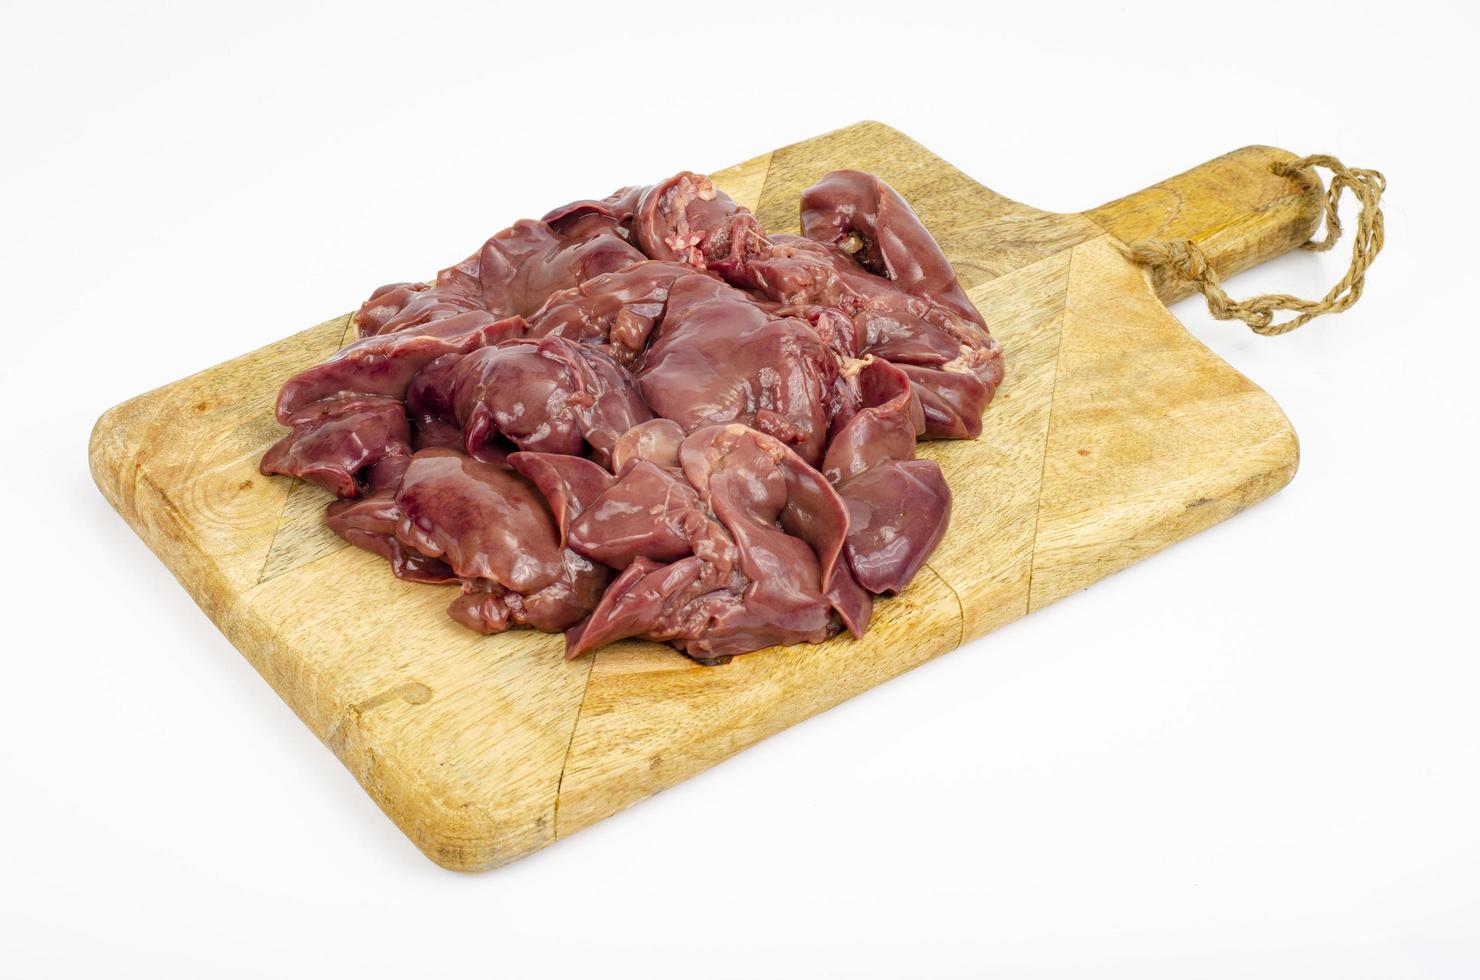 Raw chicken livers close-up on cutting board, ingredients for cooking, on white background. Studio Photo